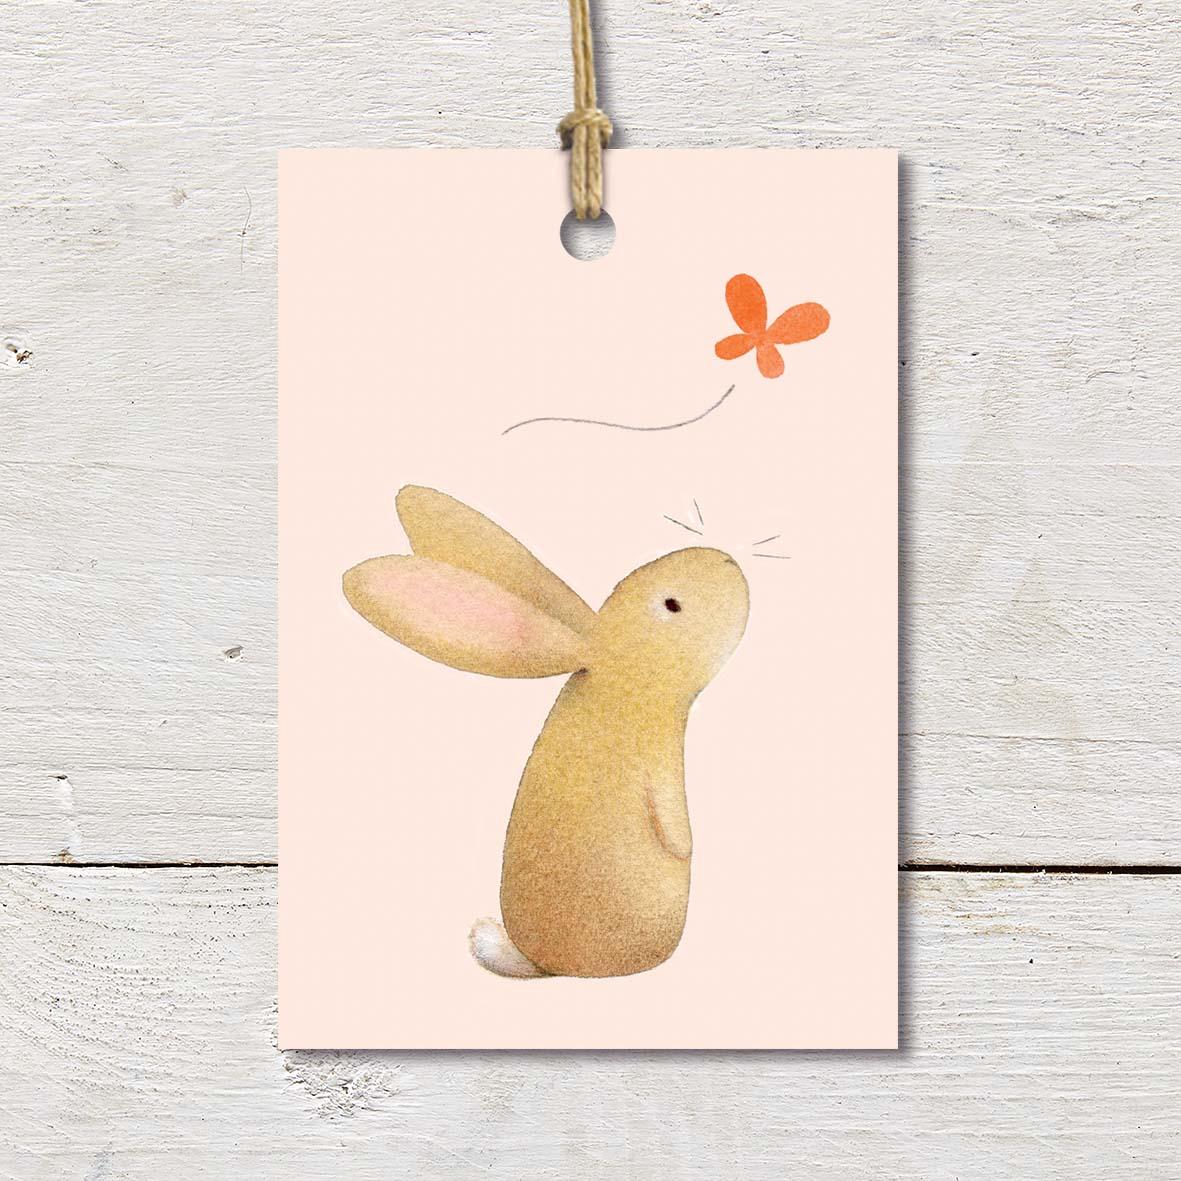 Gift Tag featuring a cute rabbit and butterfly on a pale peach background.